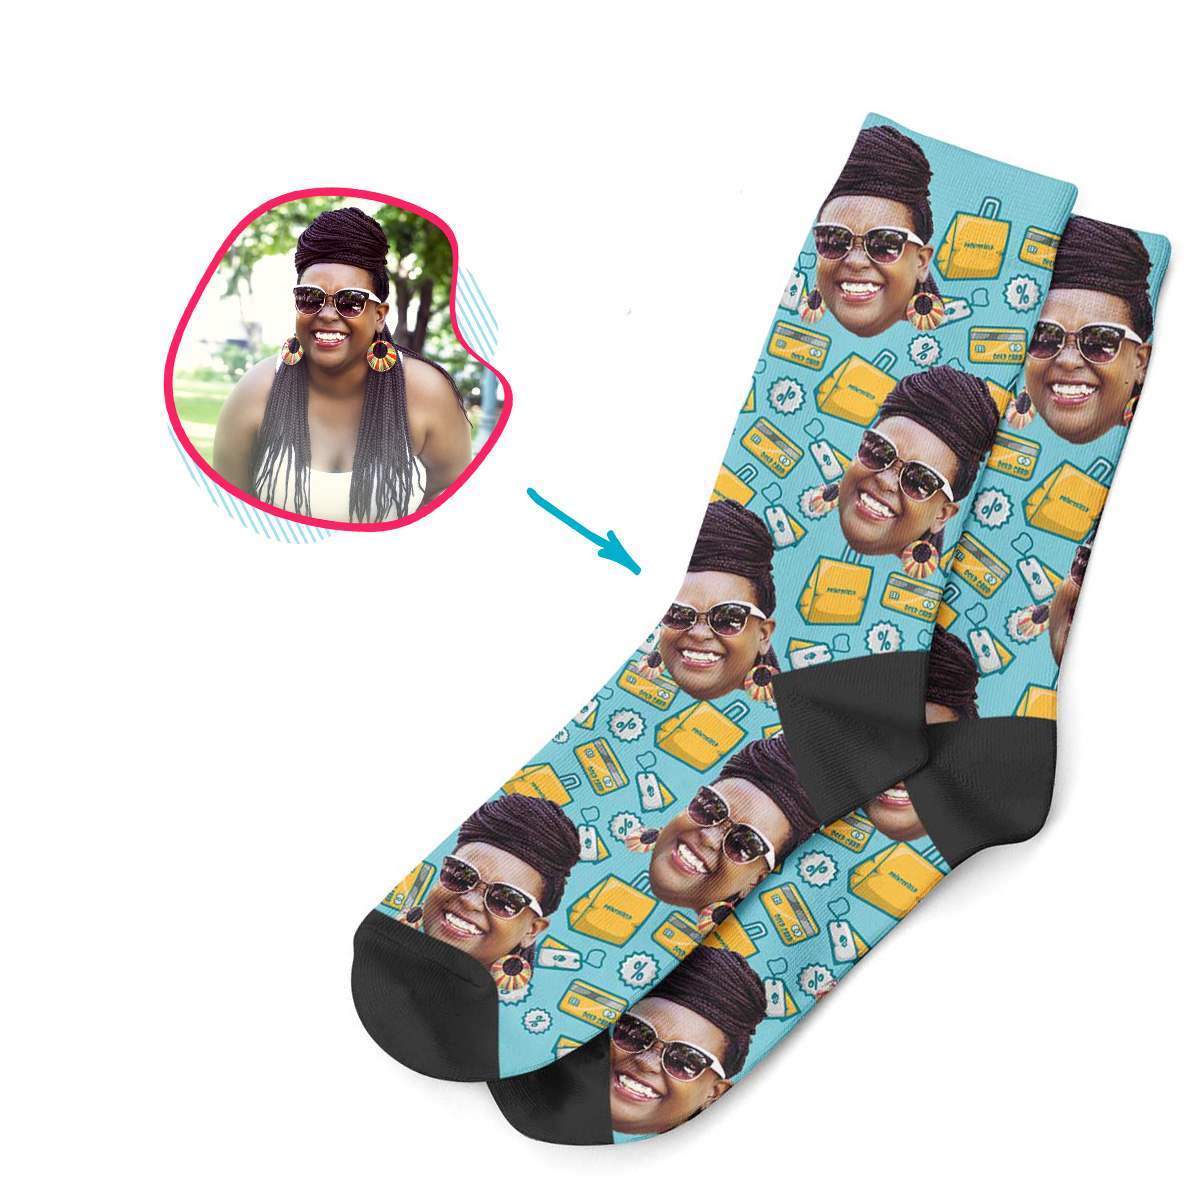 blue Shopping socks personalized with photo of face printed on them